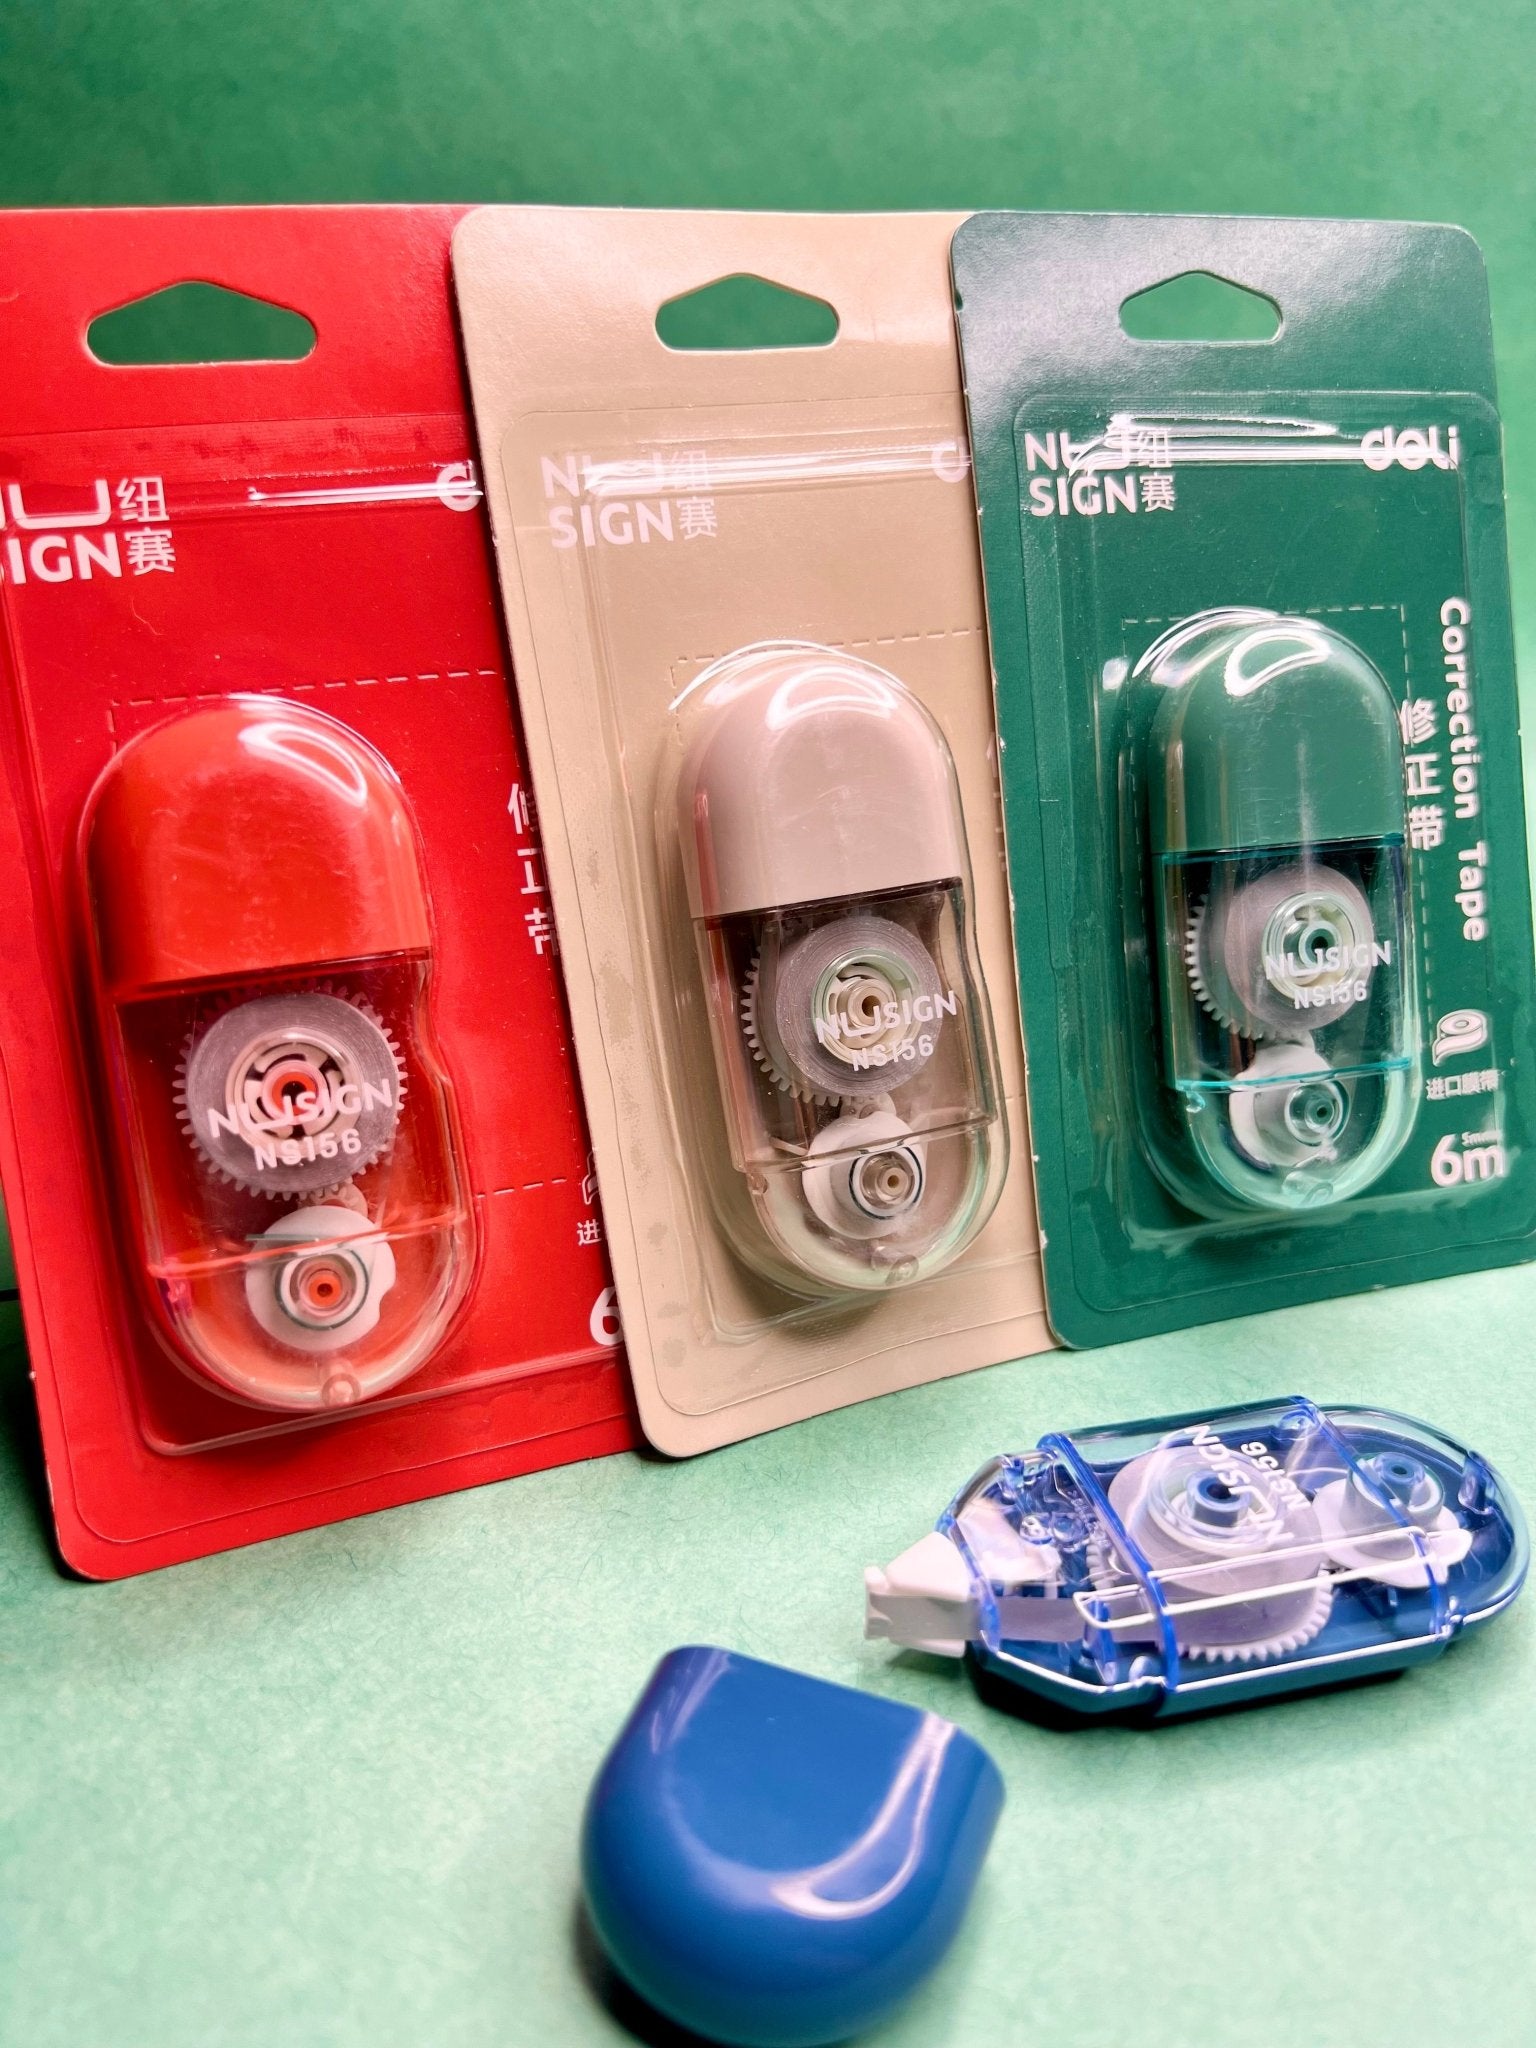 Aesthetic Stationery Product Candy Color Detachable Correction Tape For Pens, Effortless No Drying Time.